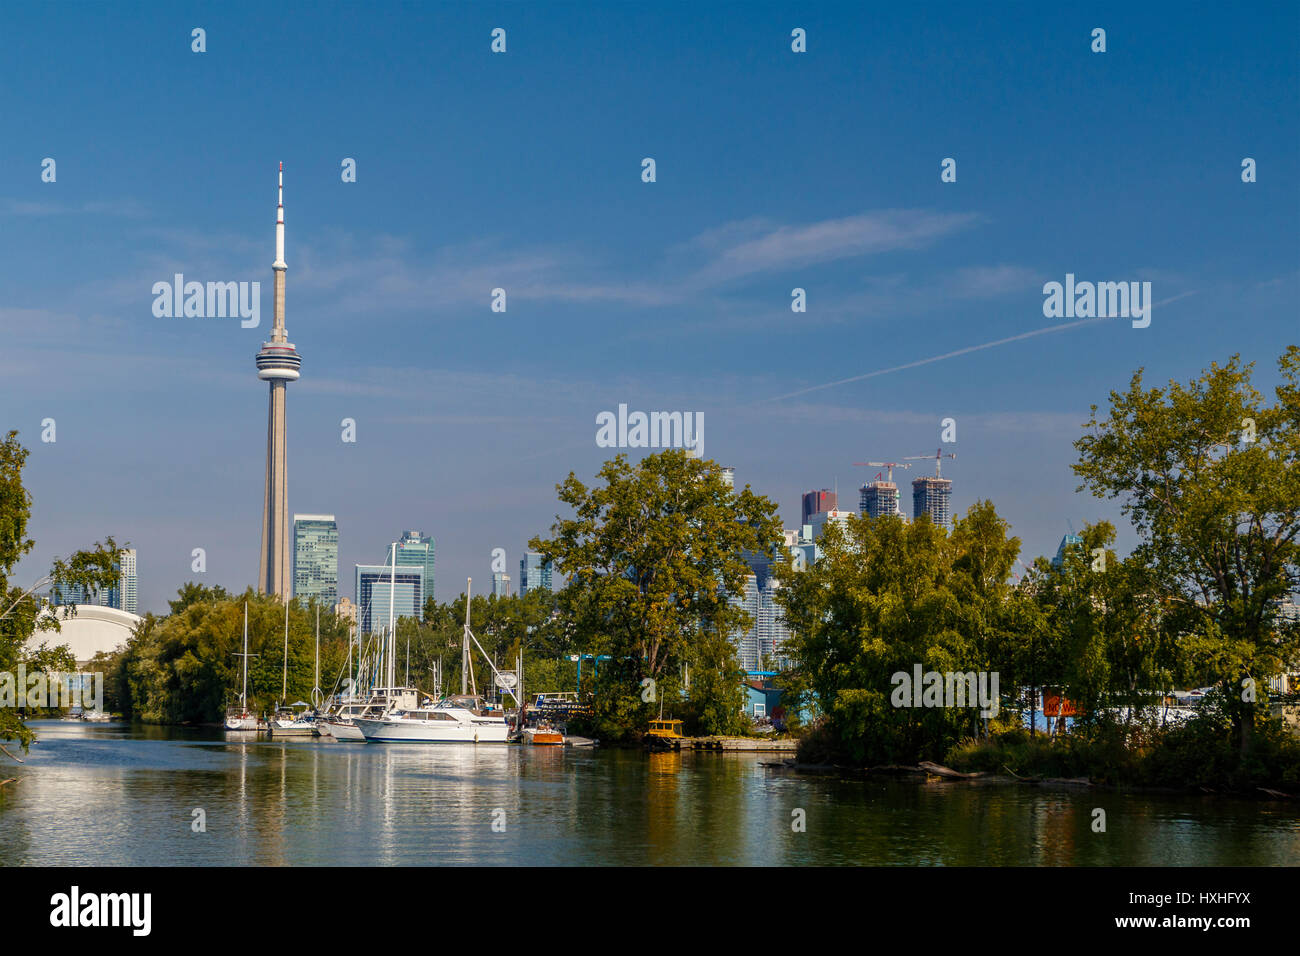 The CN Tower high above the city landscape of Toronto, Ontario, Canada. Stock Photo